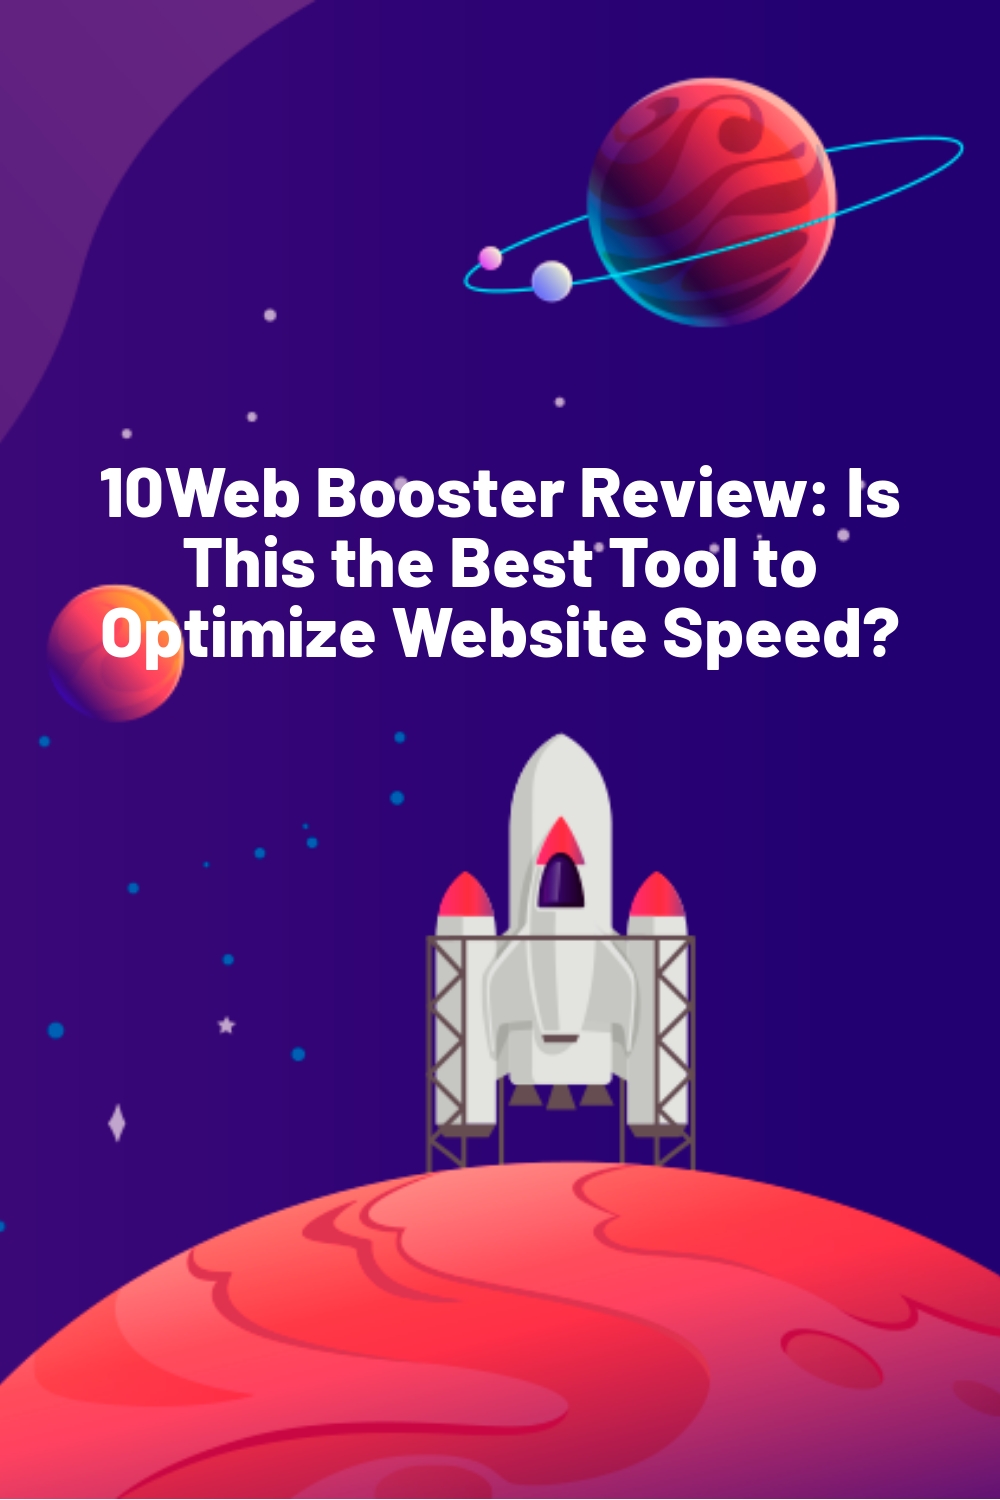 10Web Booster Review: Is This the Best Tool to Optimize Website Speed?